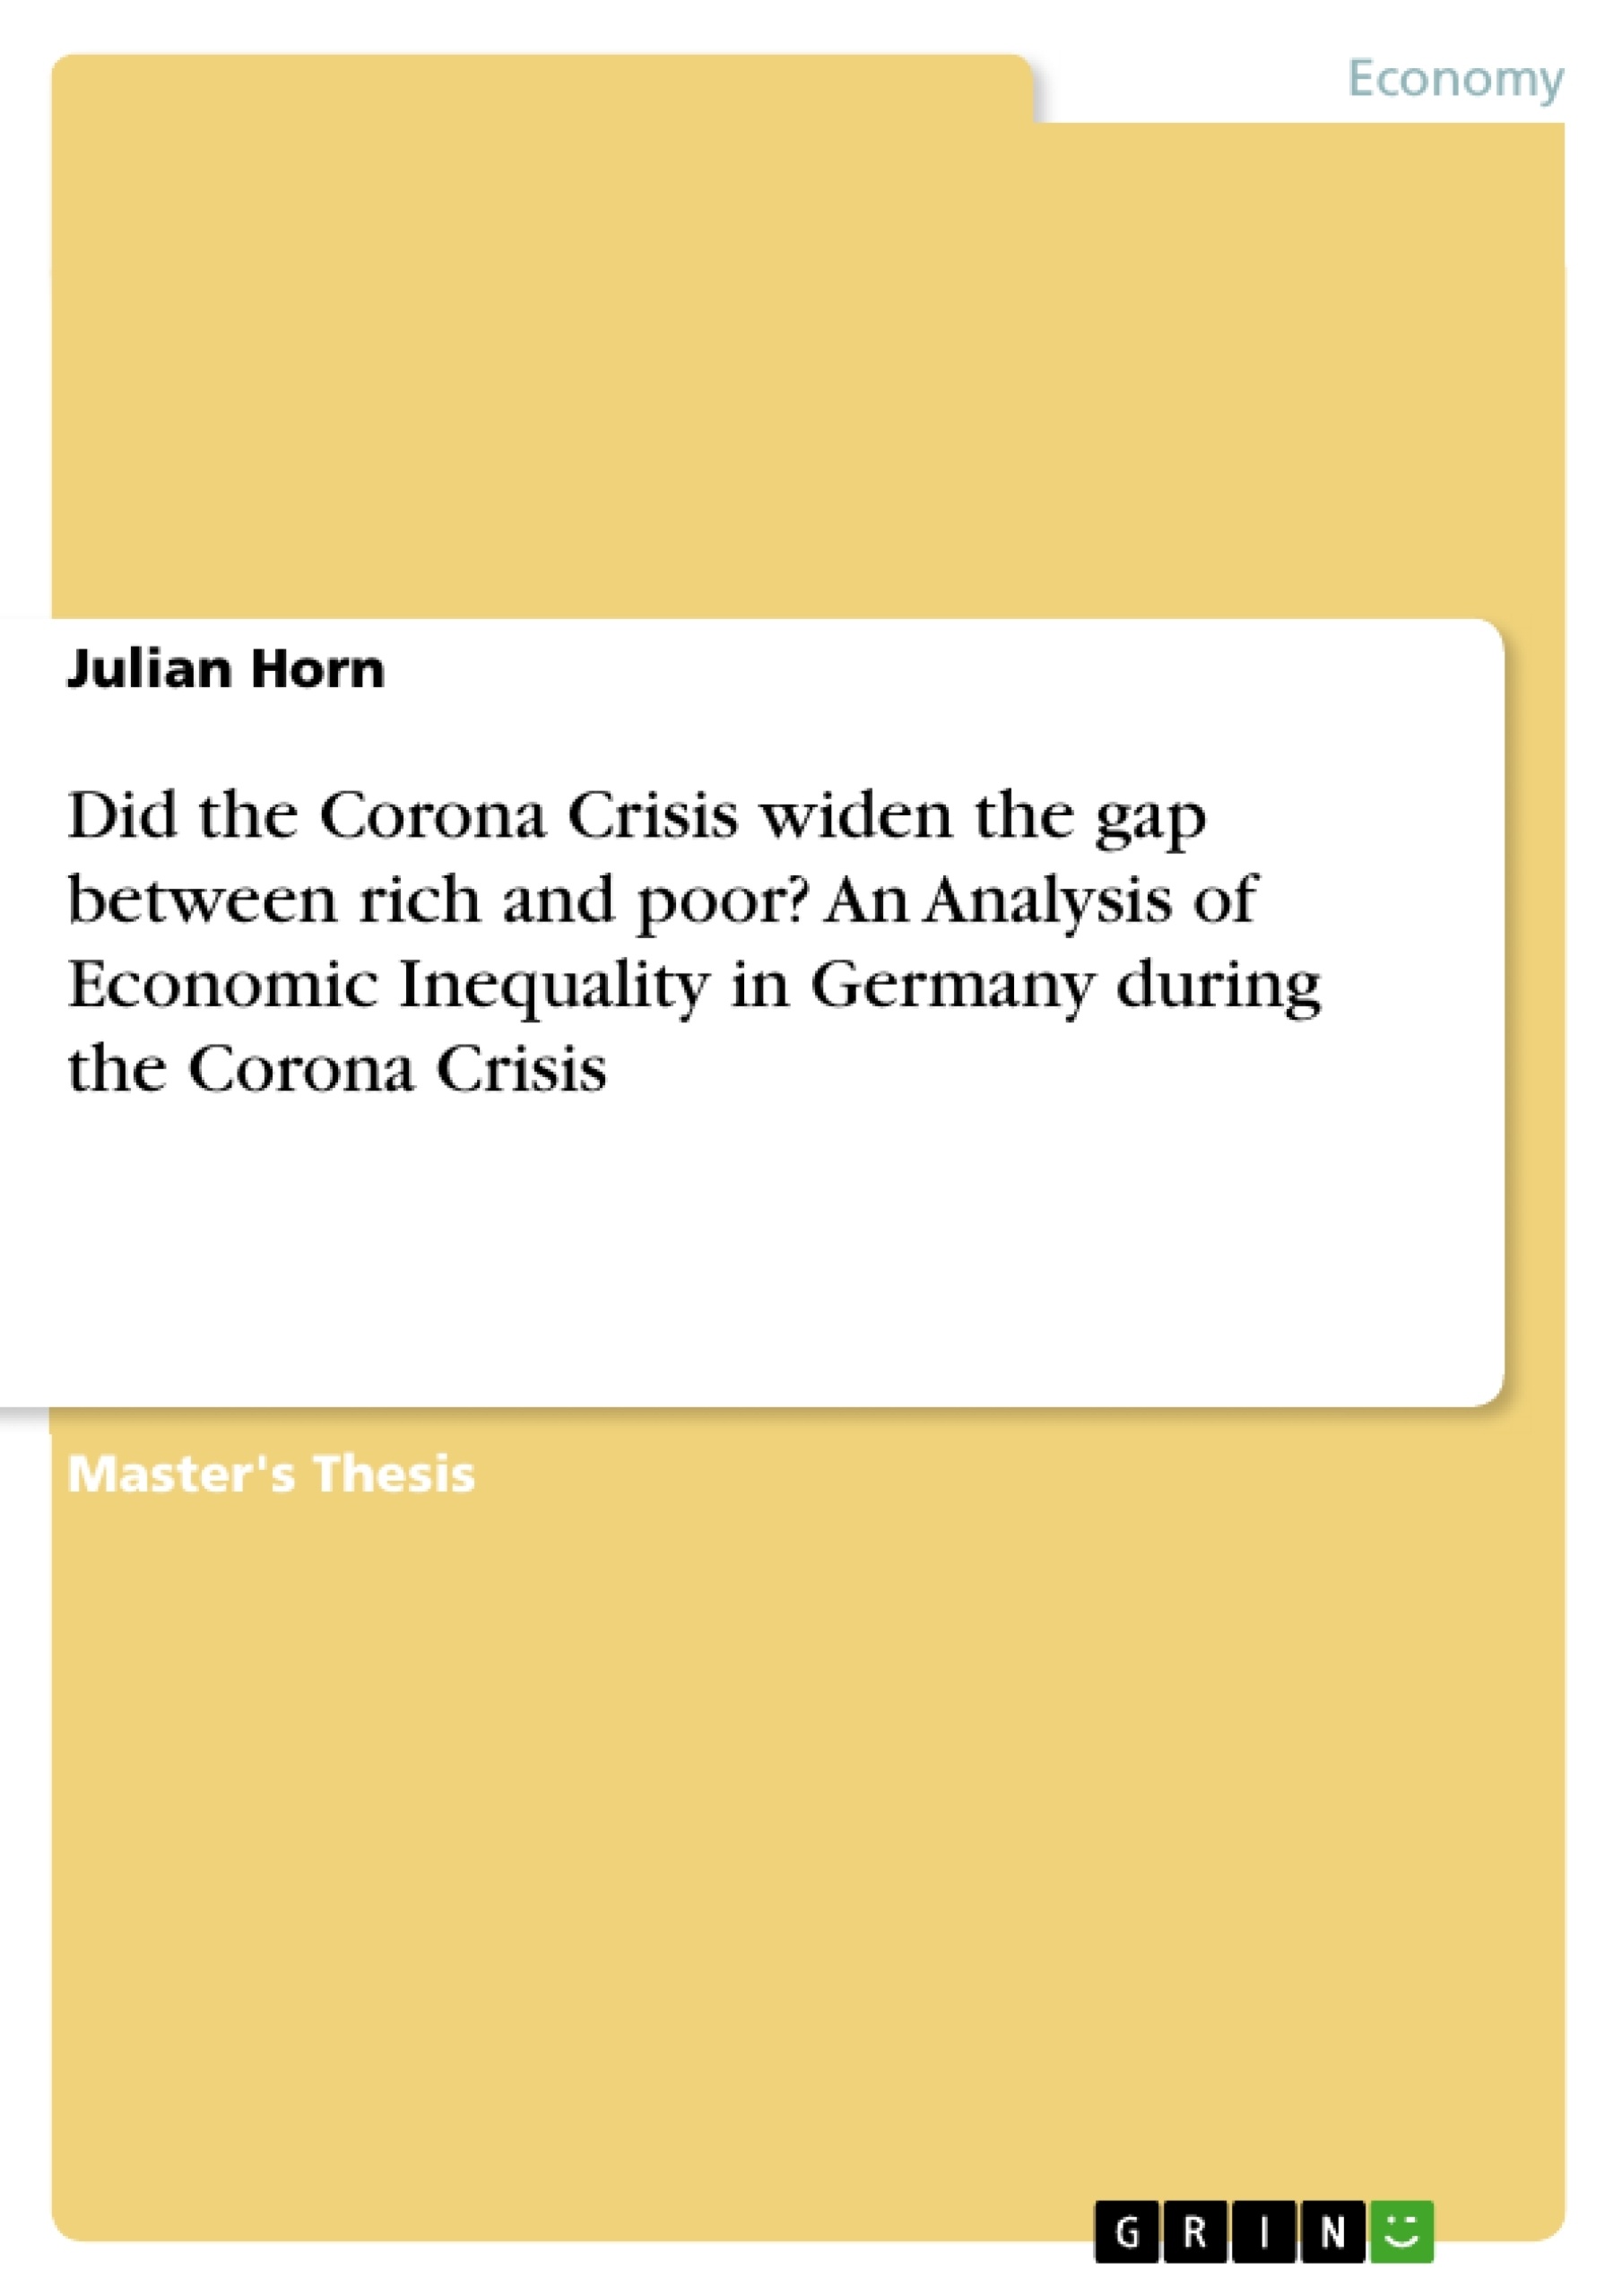 Title: Did the Corona Crisis widen the gap between rich and poor? An Analysis of Economic Inequality in Germany during the Corona Crisis